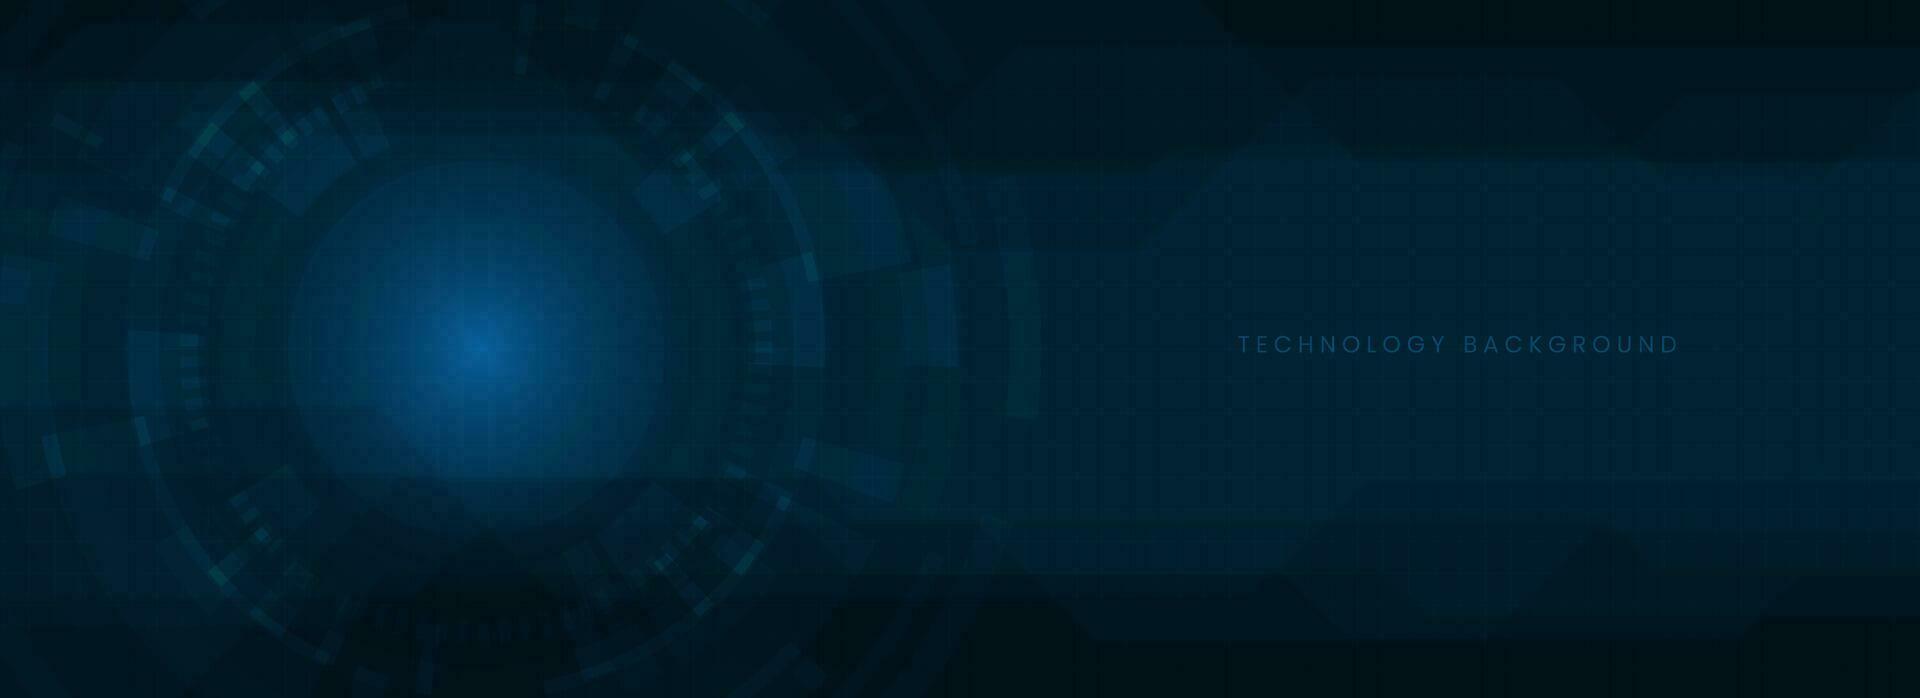 glowing blue technology circle Futuristic background concept vector